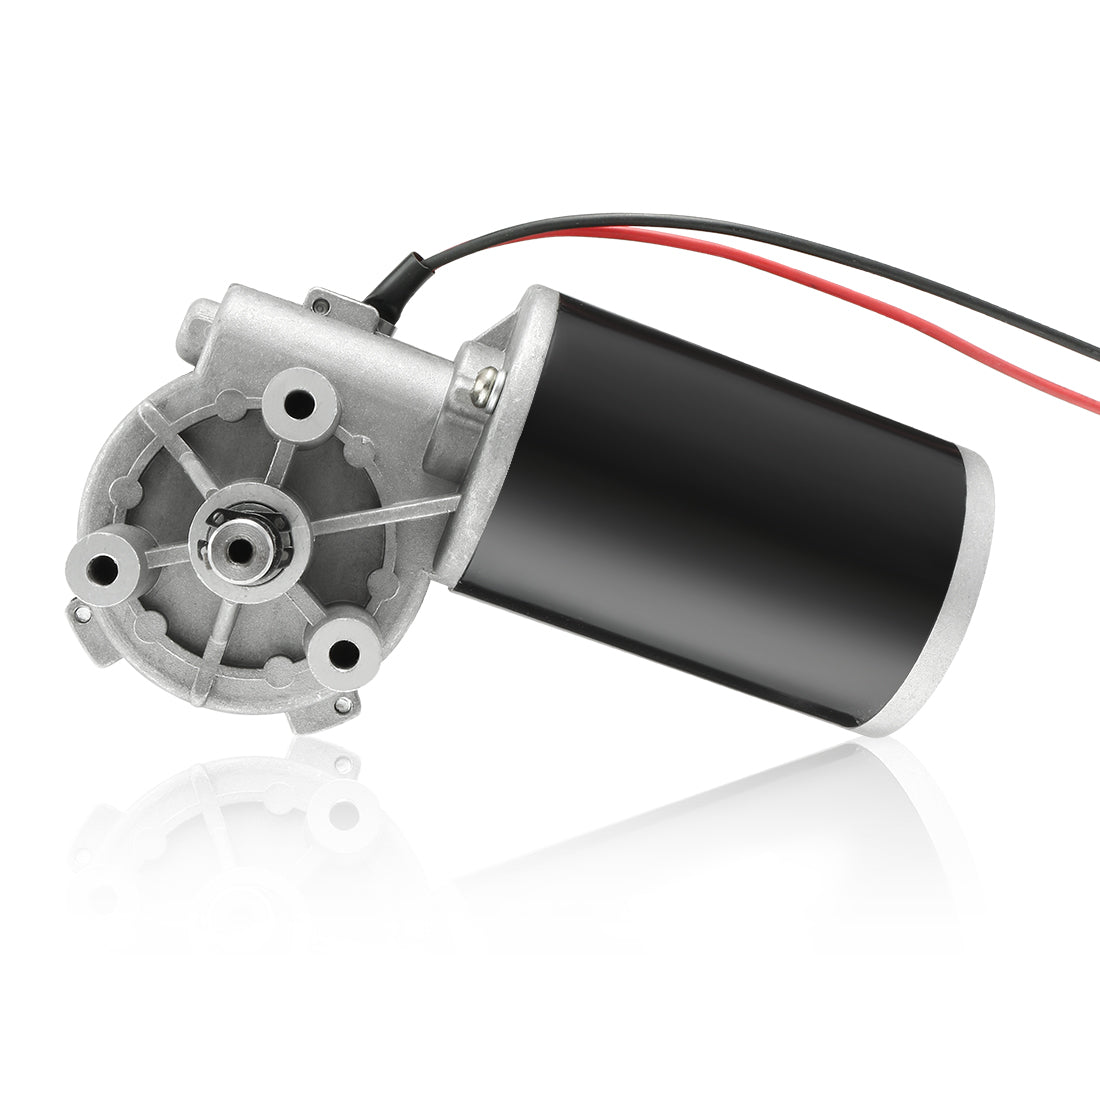 uxcell Uxcell JCF63R DC 24V 10W 6RPM High Torque Reversible Electric Gear Motor 6RPM